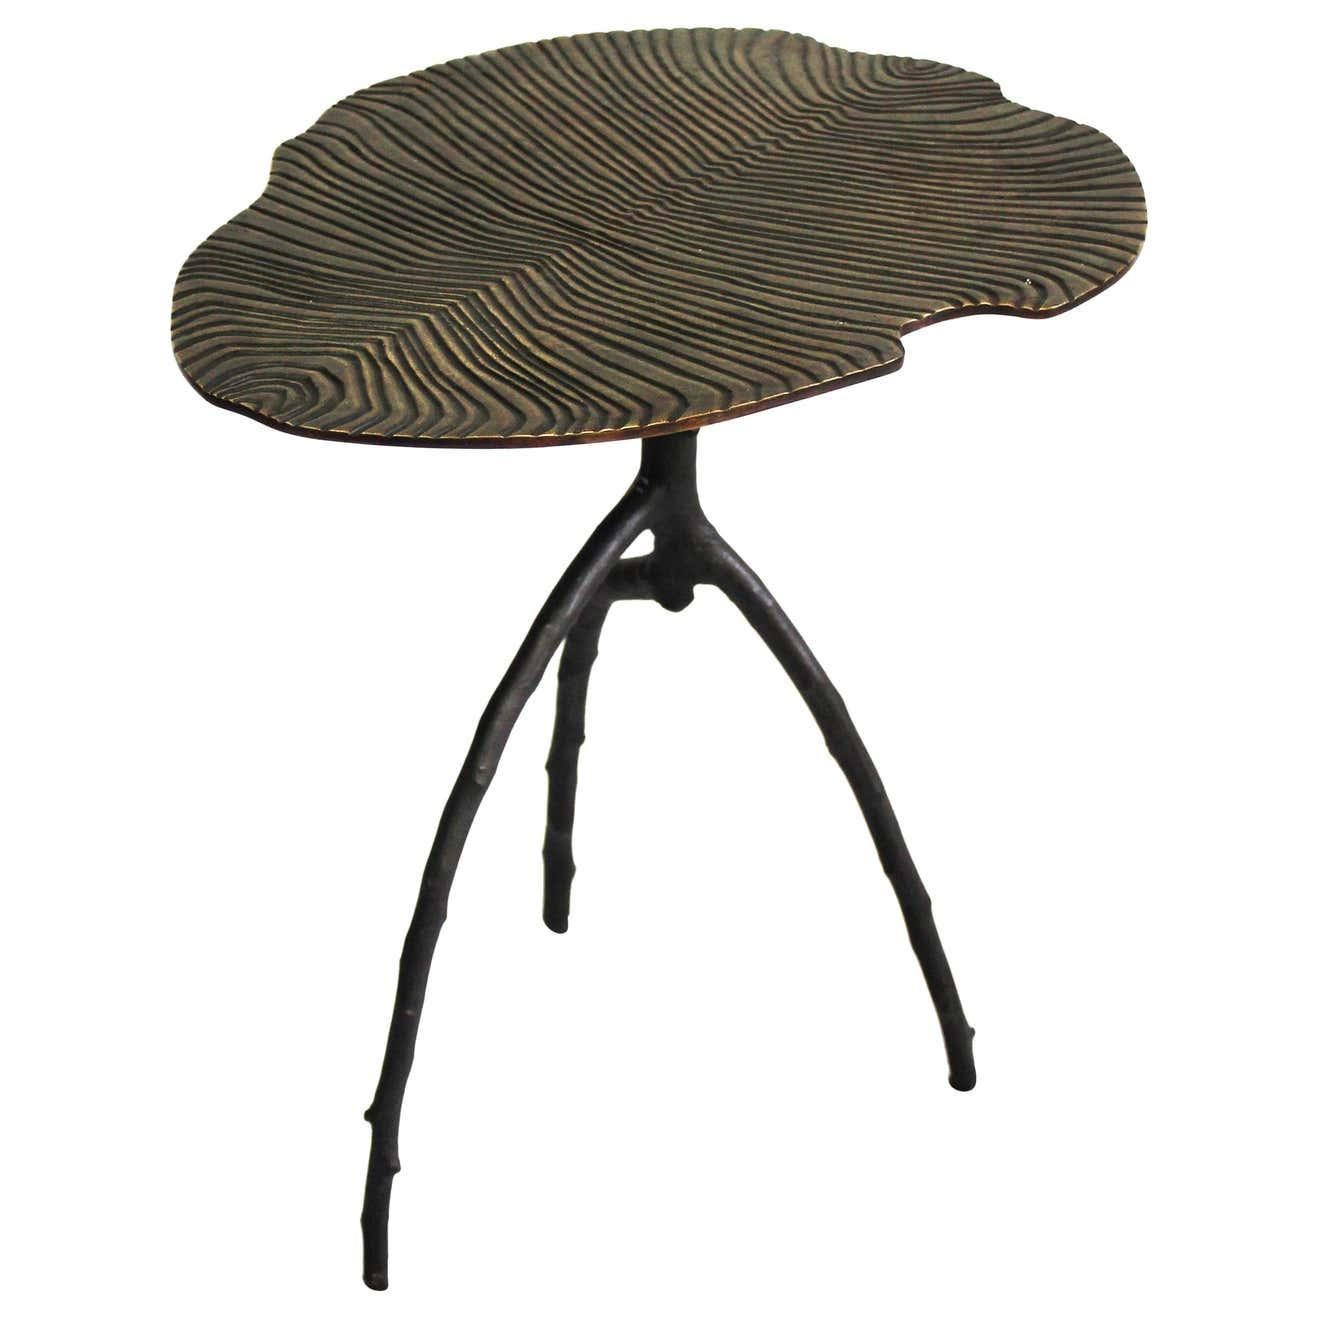 Medium fossil side table by Plumbum 
Signed by Eric Gizard and Plumbum
Dimensions: 16.53